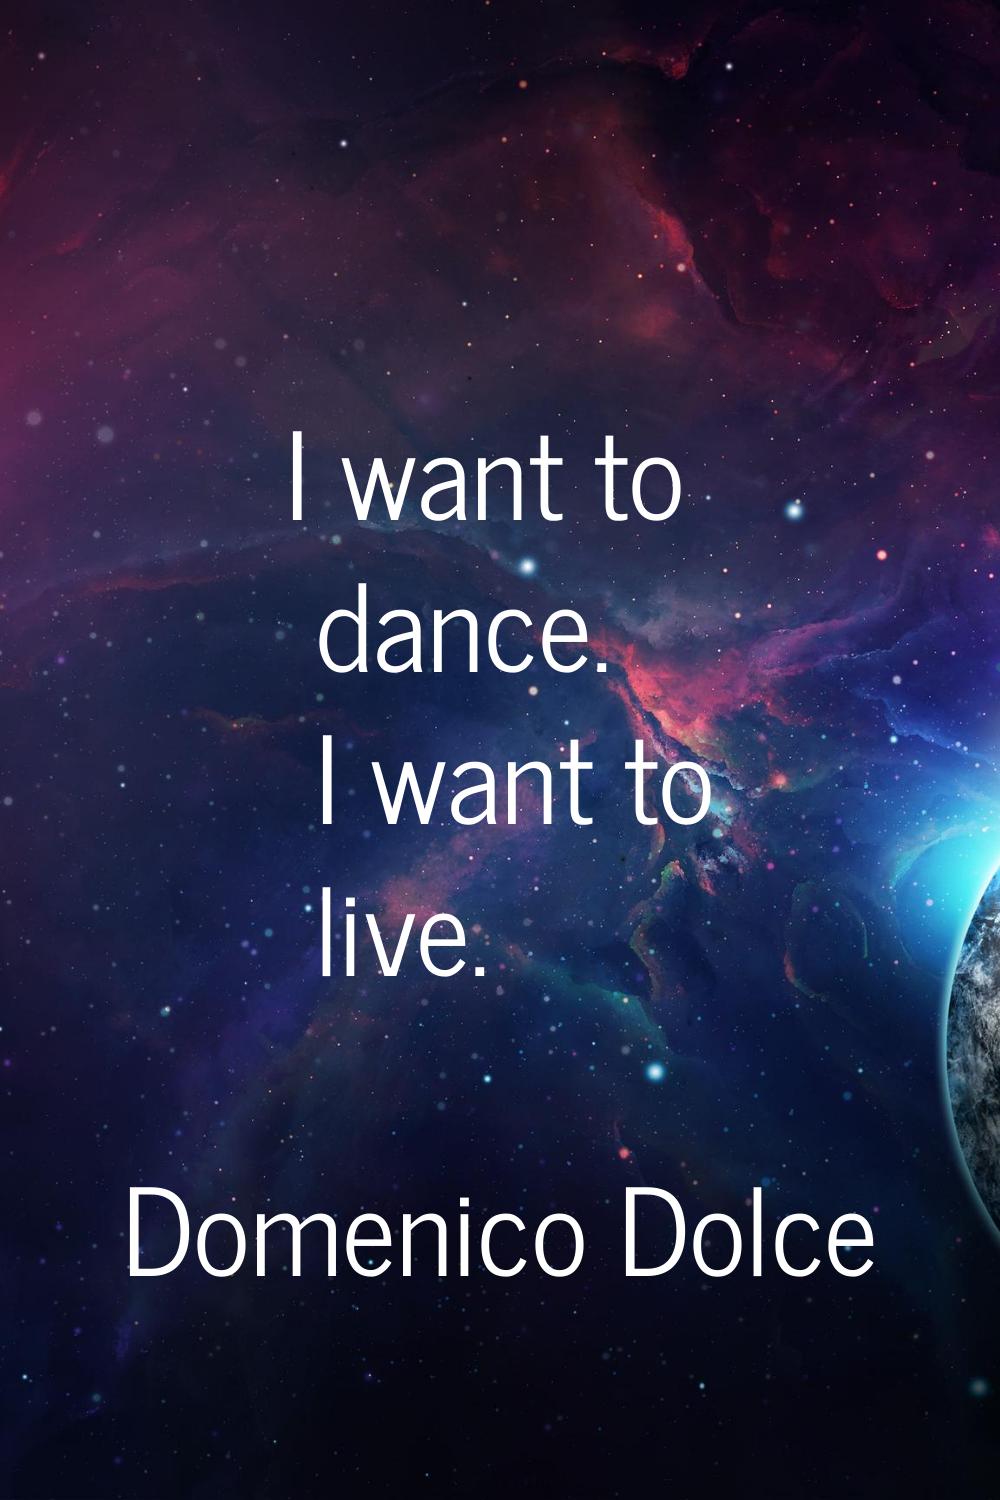 I want to dance. I want to live.